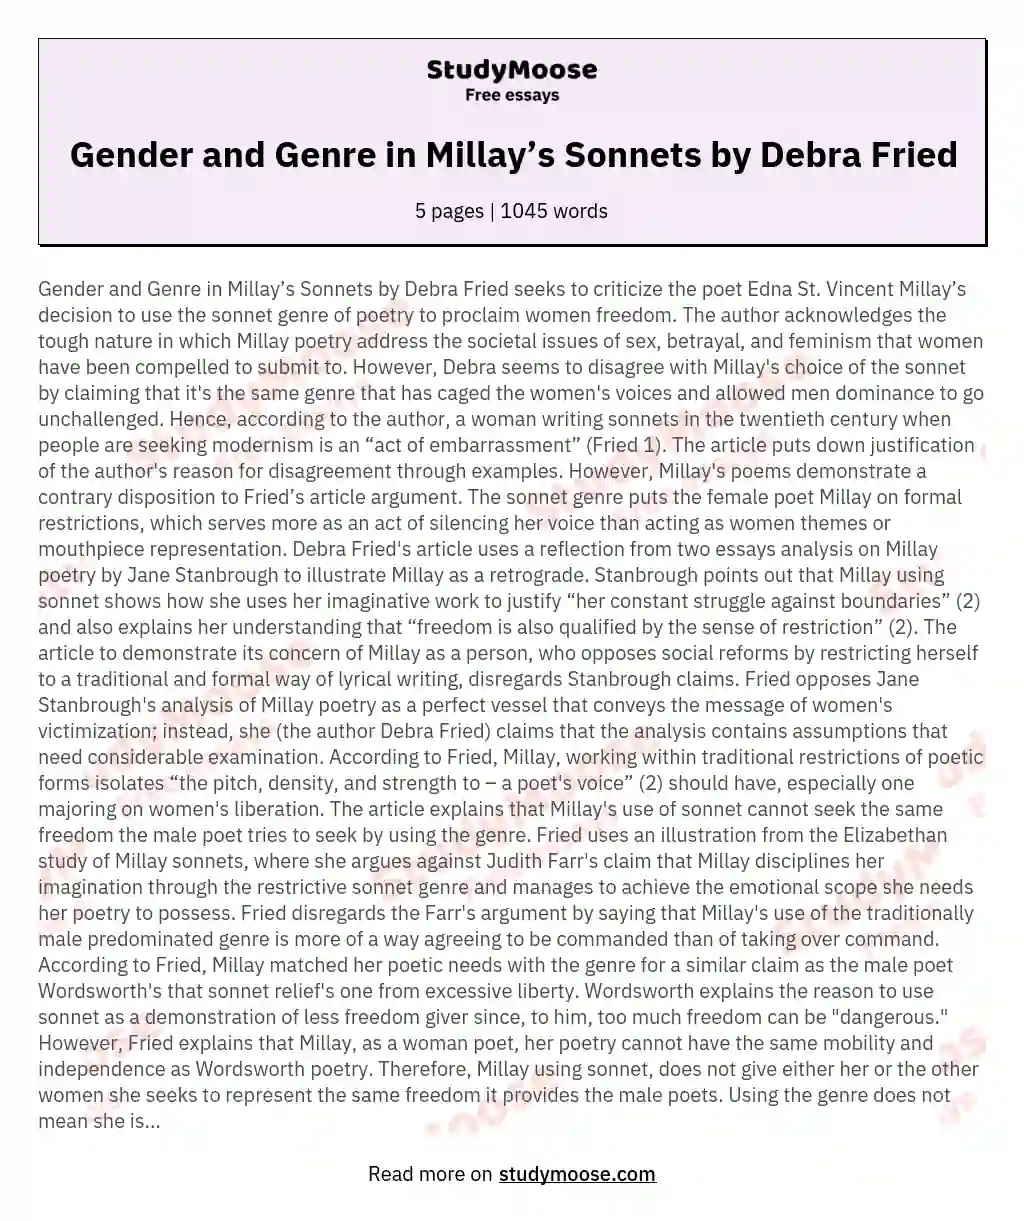 Gender and Genre in Millay’s Sonnets by Debra Fried essay